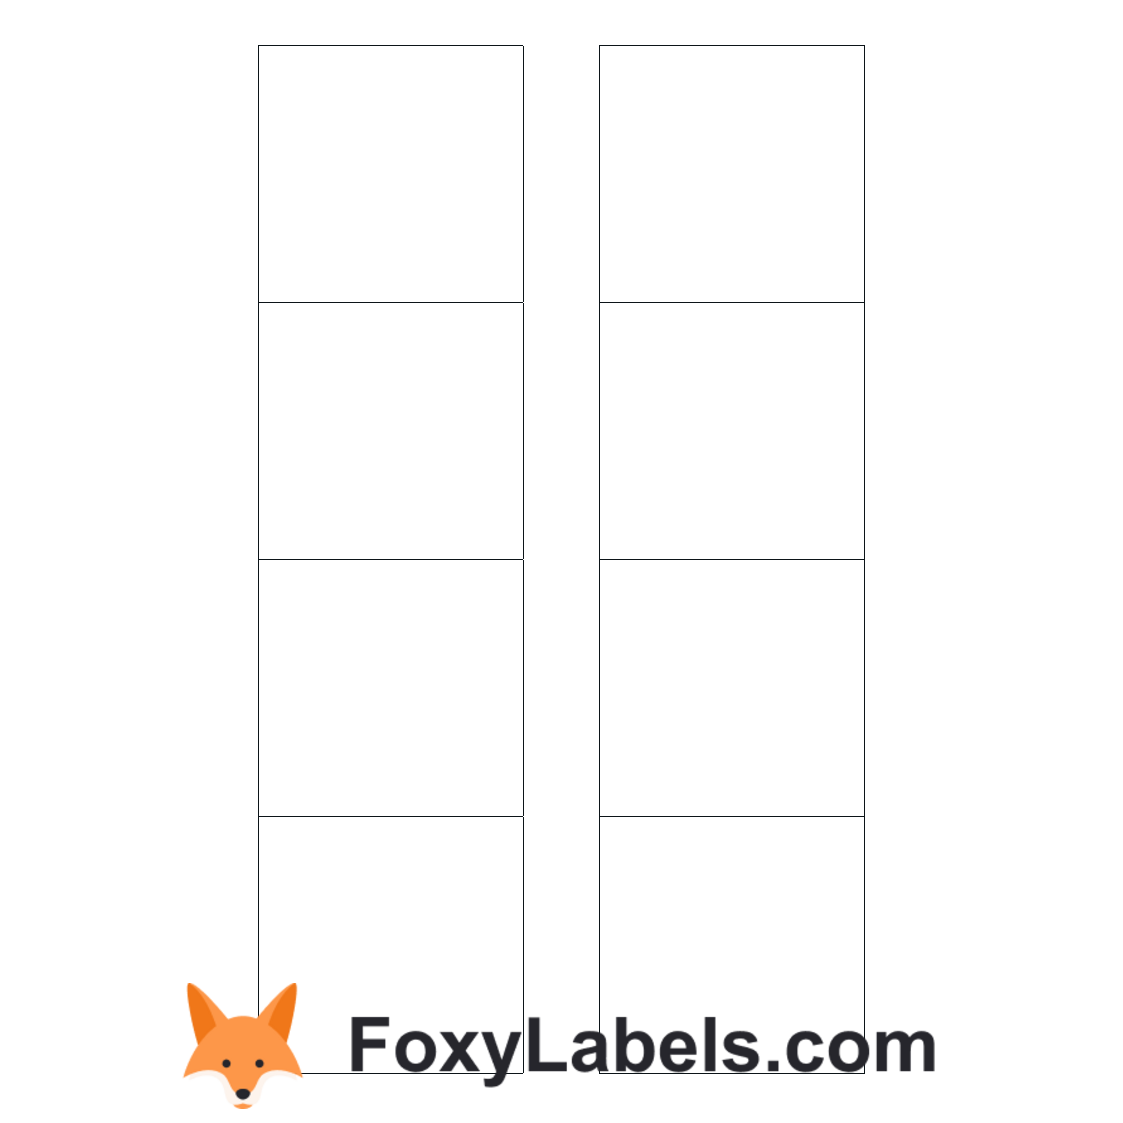 Herma 4355 label template for Google Docs